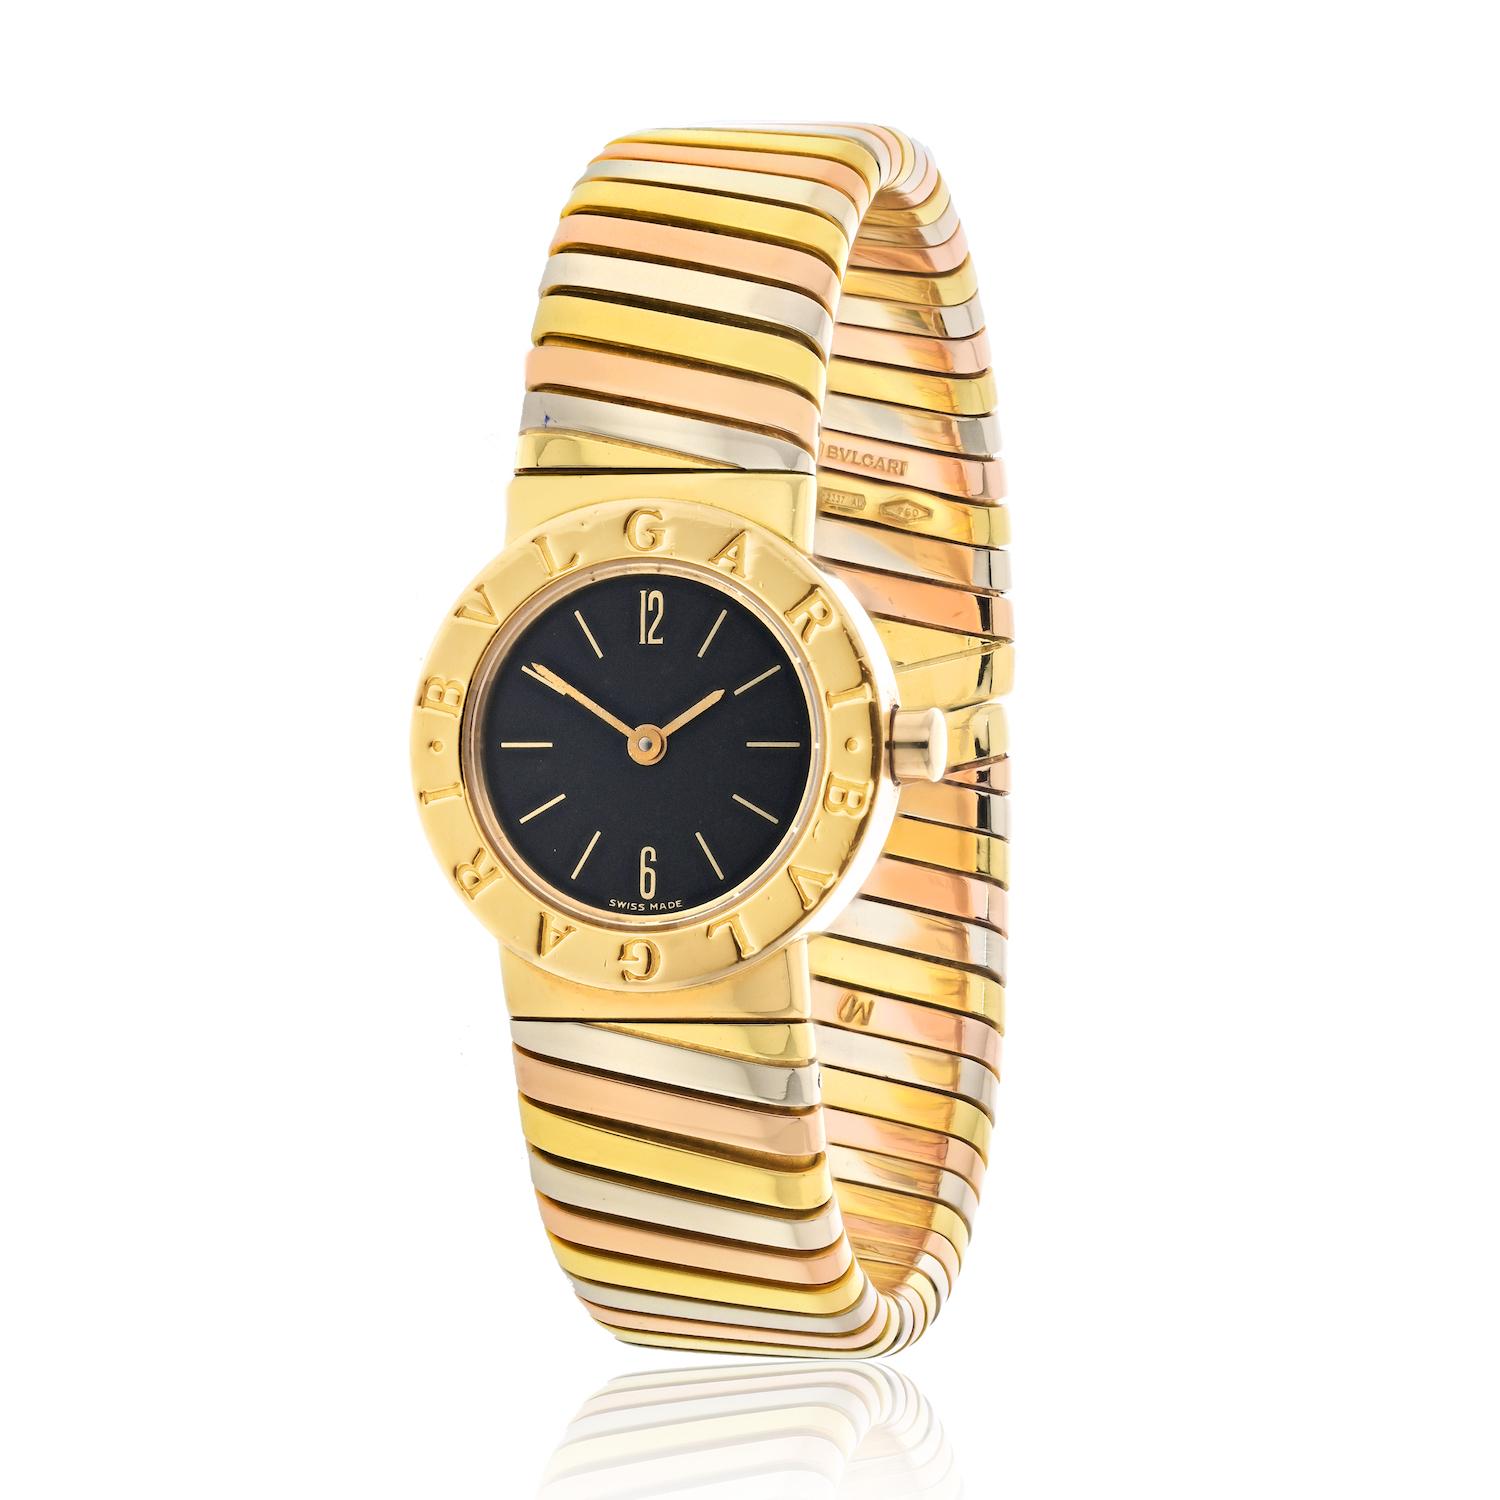 Indulge in the epitome of luxury with the Bvlgari Tubogas watch in 18K white and yellow gold. 

This masterpiece, driven by a precise quartz movement, boasts a refined 23mm case size that gracefully adorns your wrist. With a perfect fit for a 6-inch